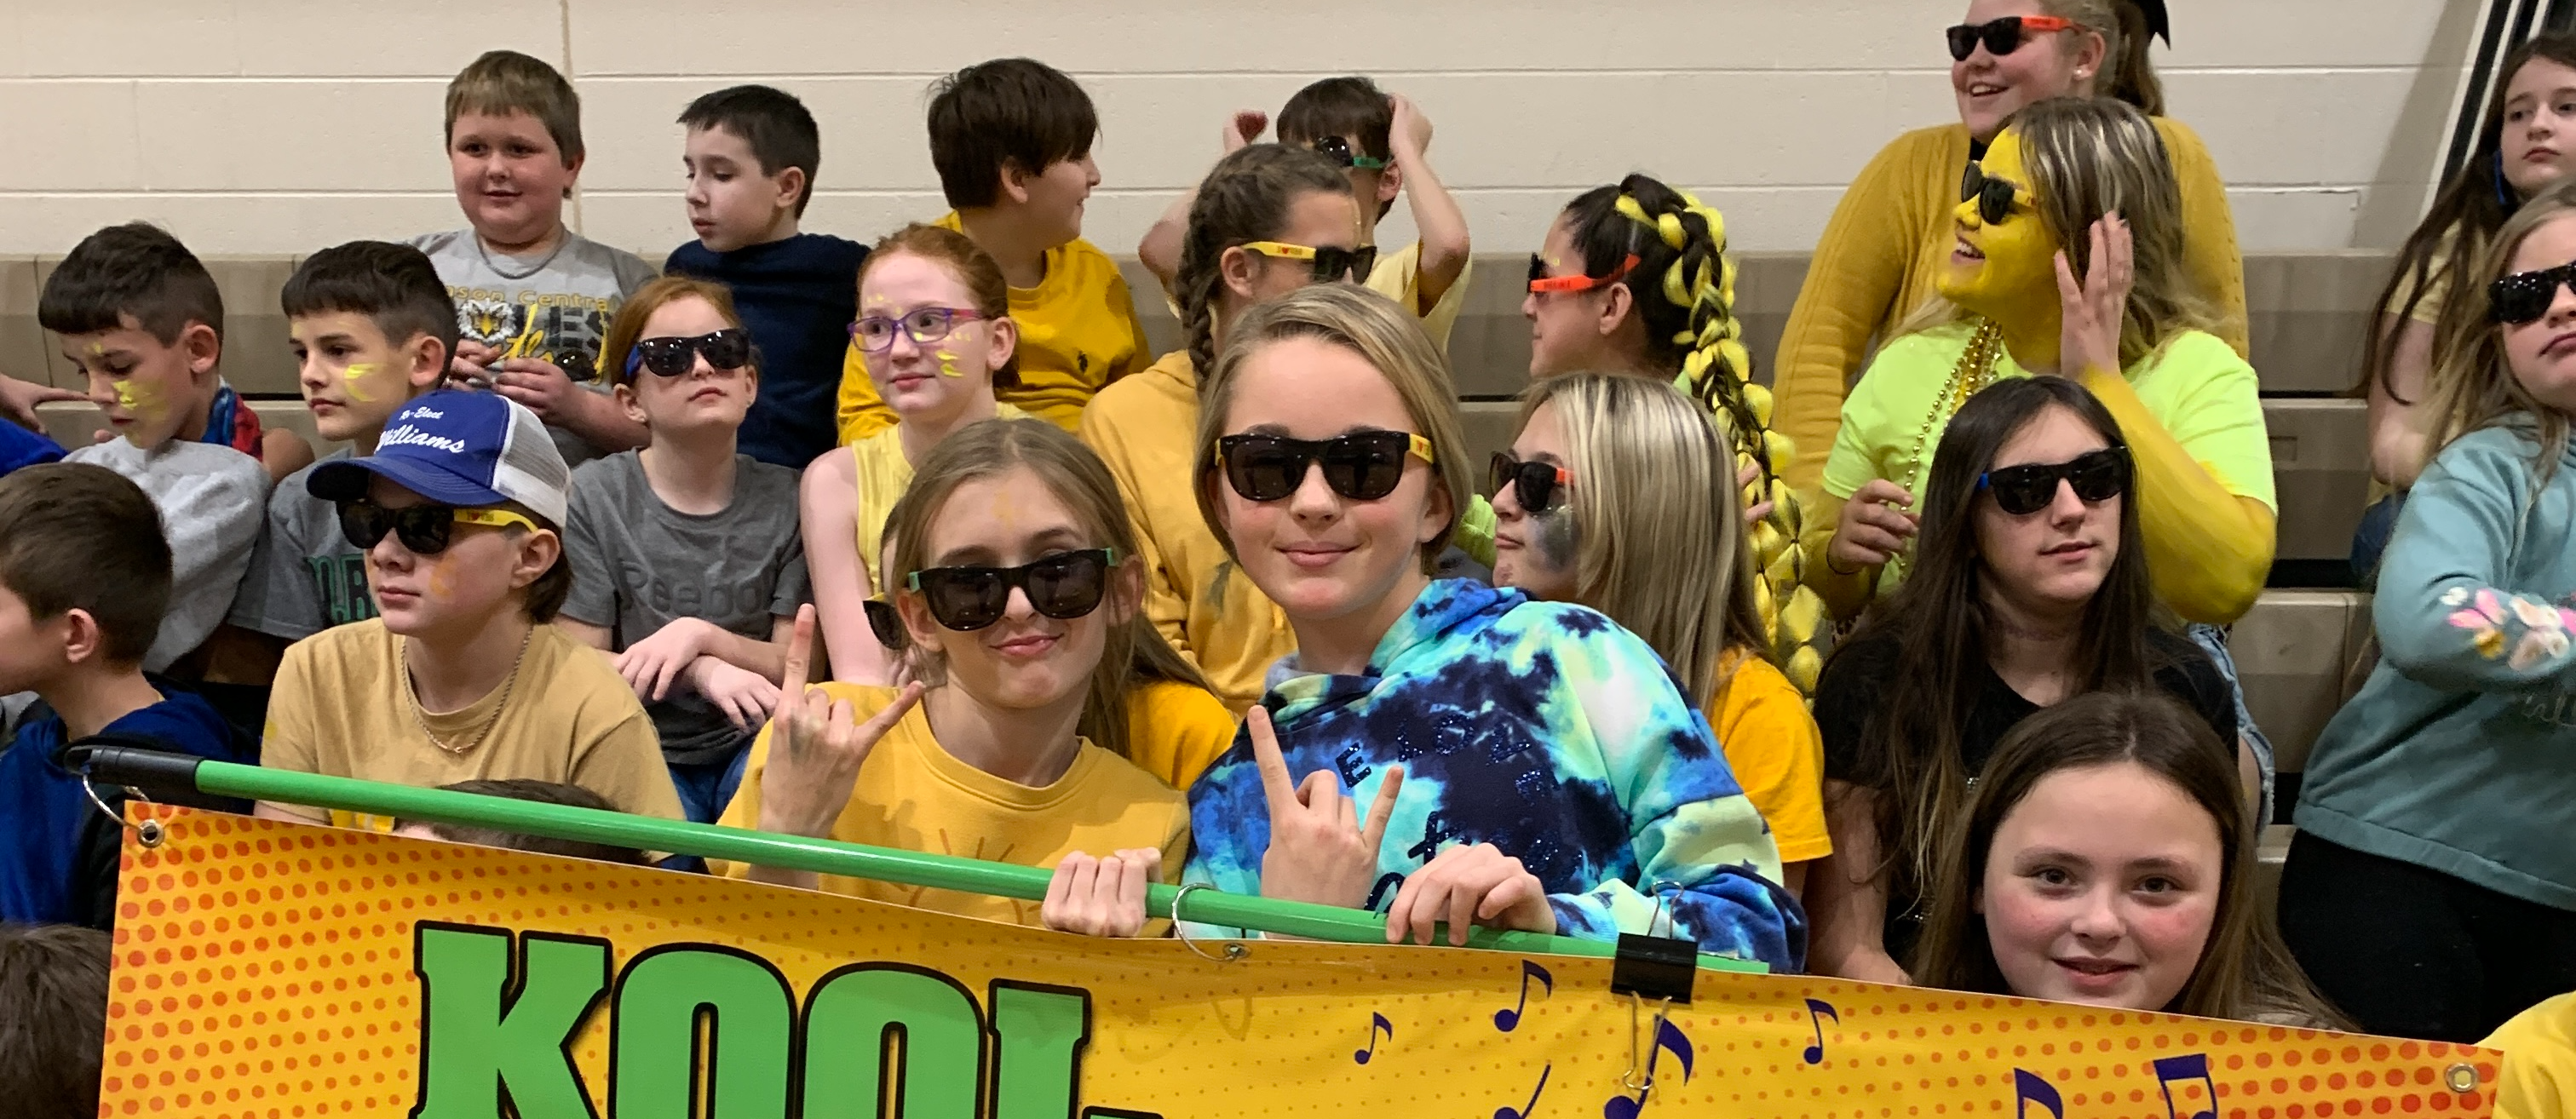 Battle of the Bands-Yellow Team